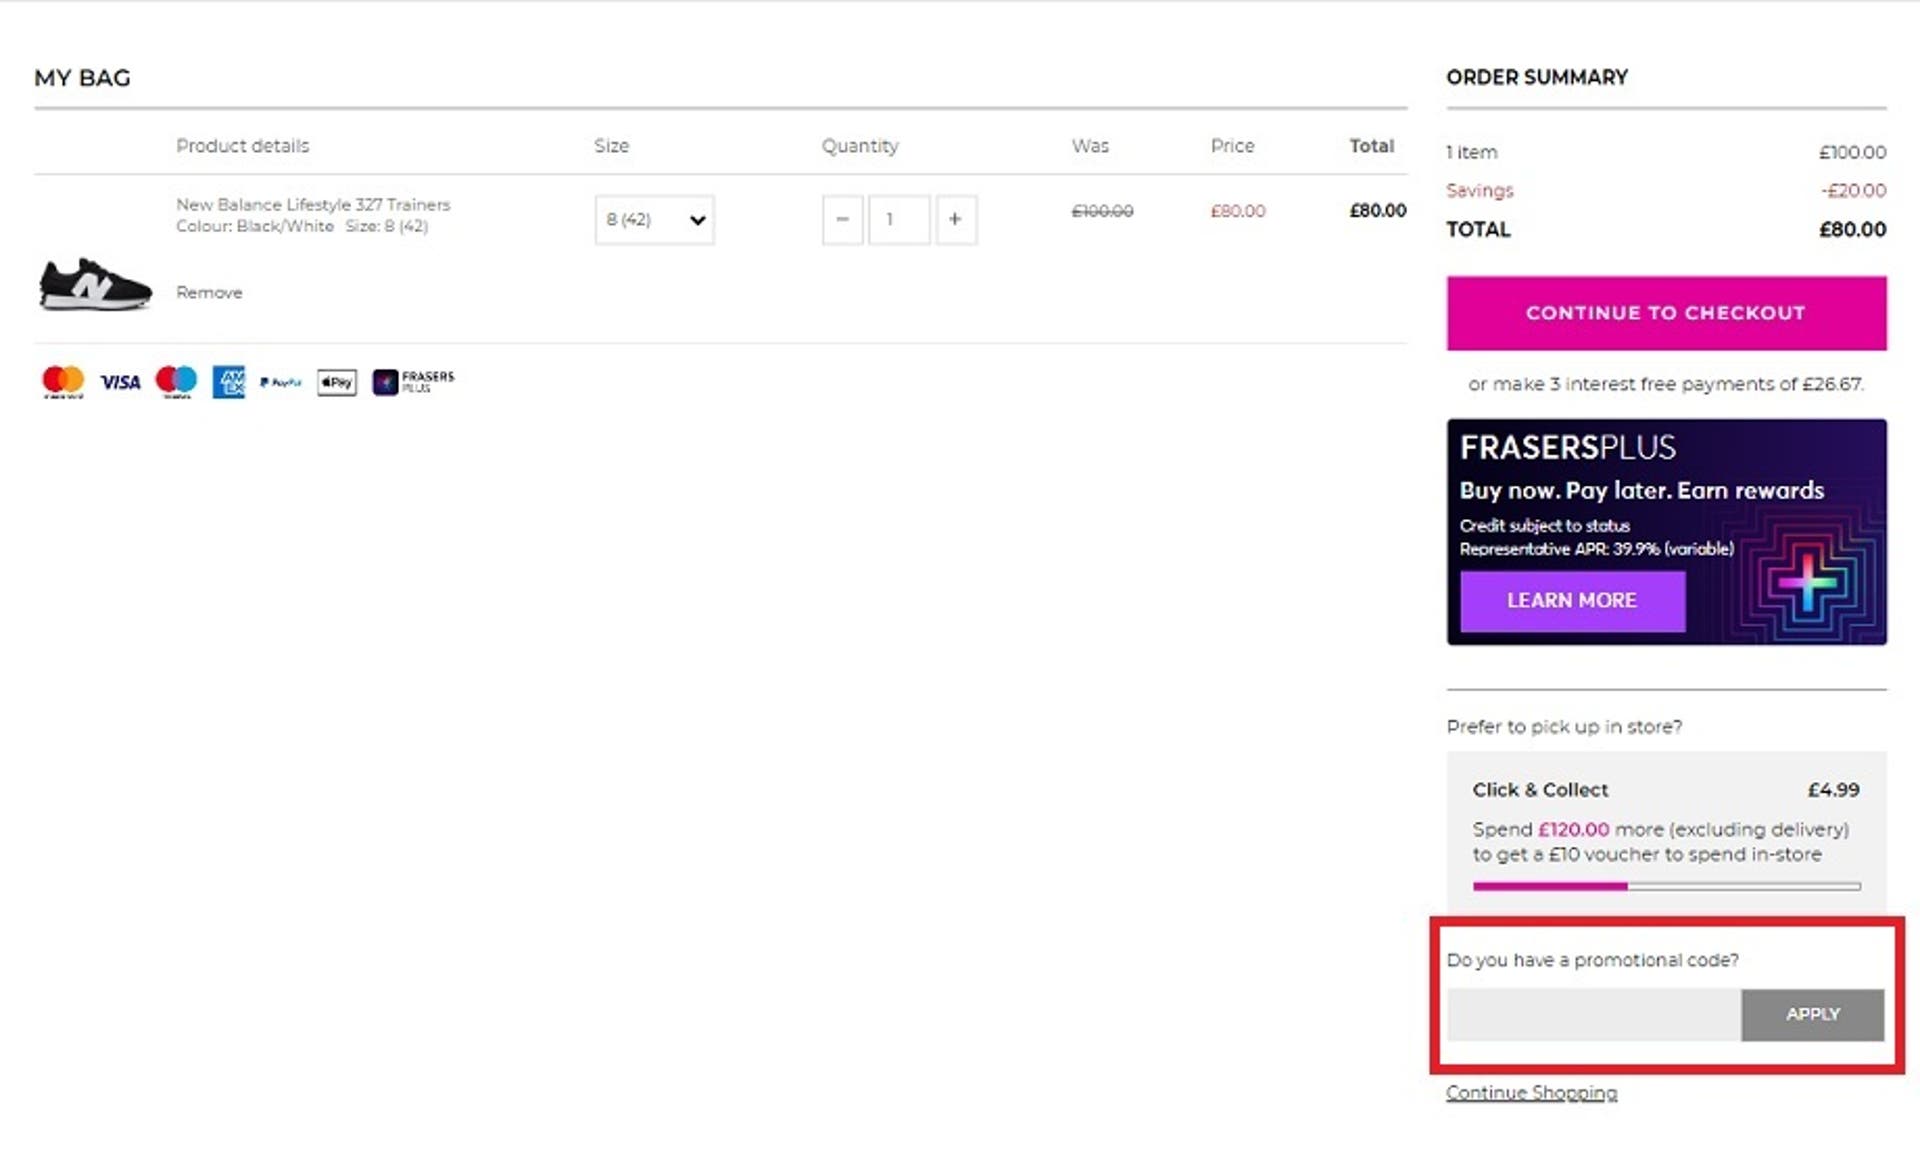  A screenshot of the House of Fraser website showing users how to use their discount code with the 'Do you have a promotional code?' box highlighted. 